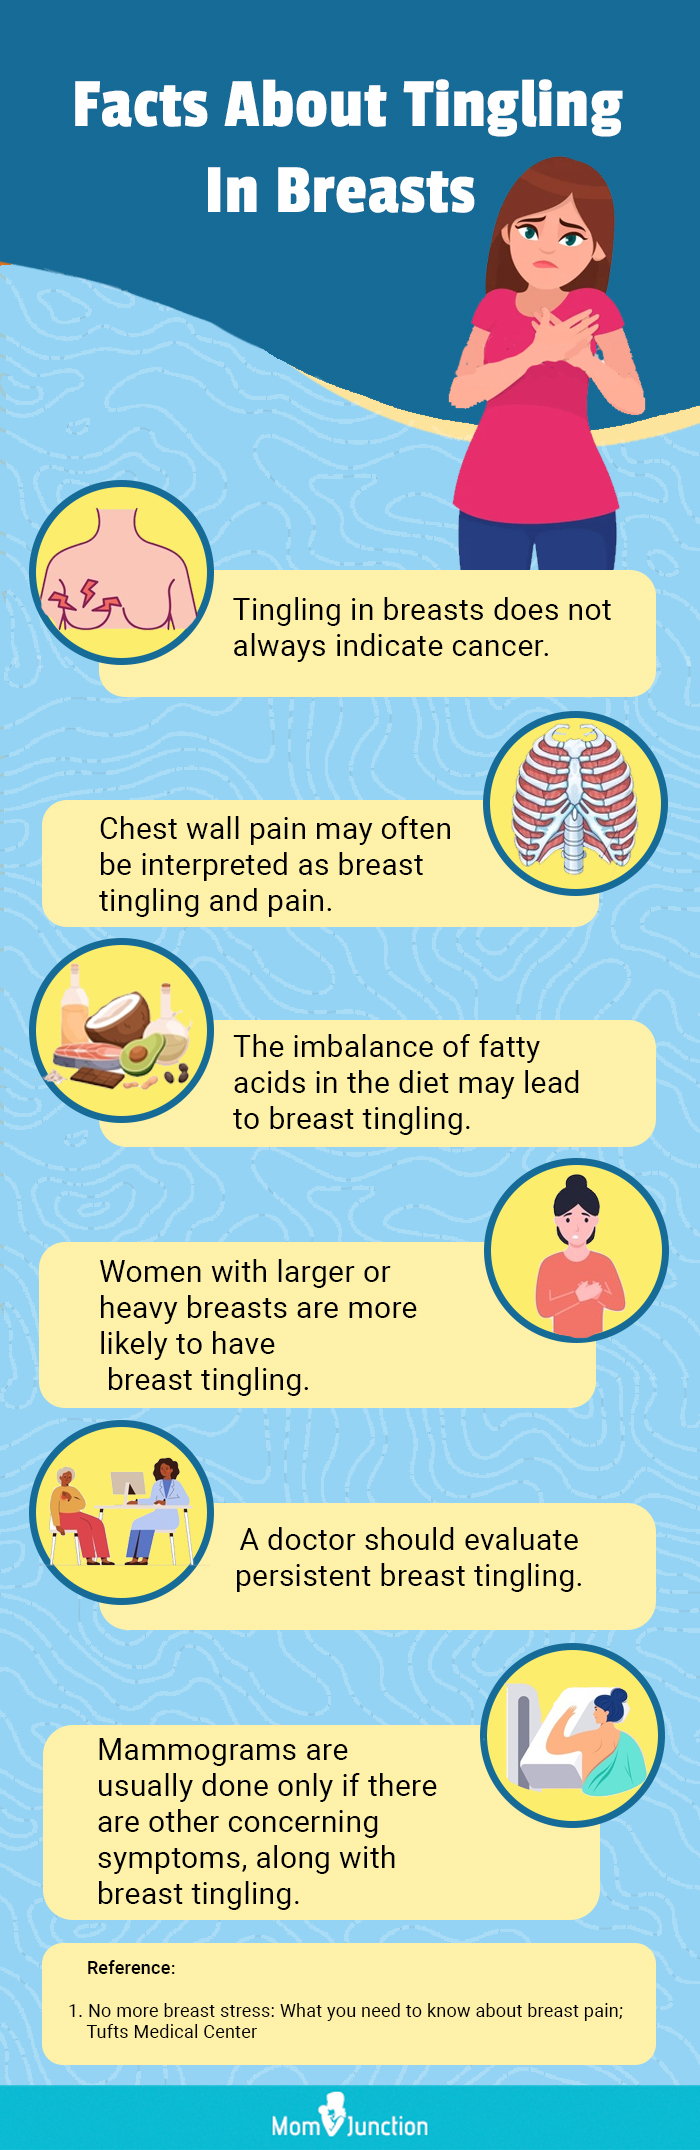 facts about tingling in breasts [infographic]